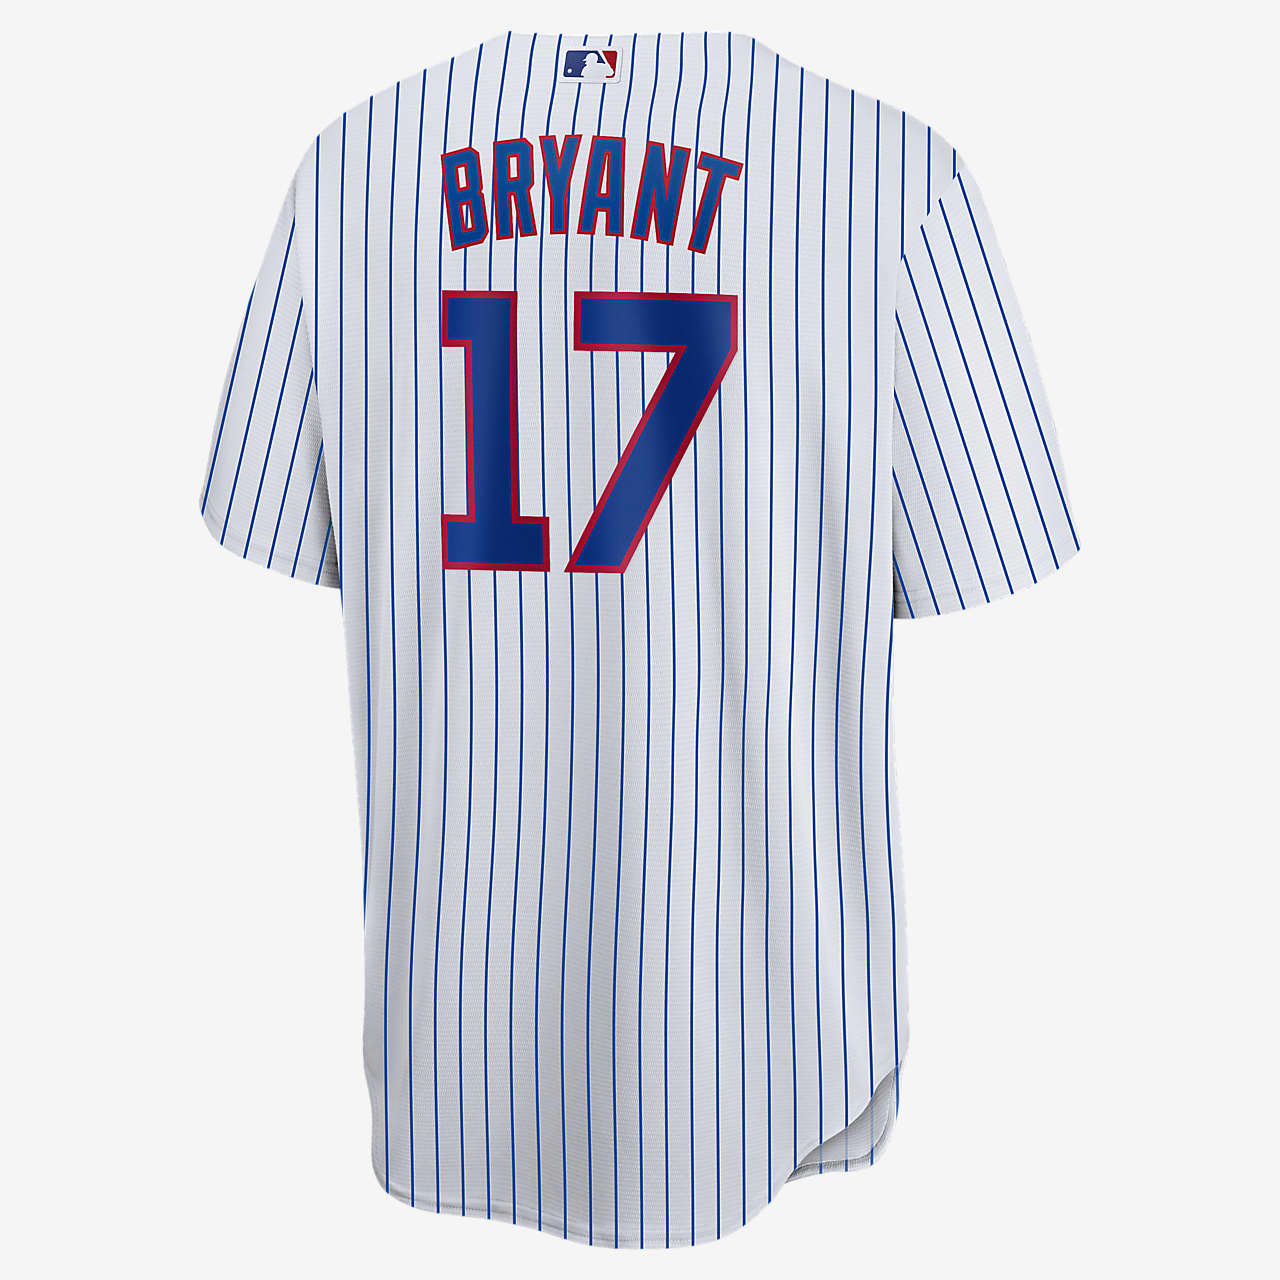 official kris bryant jersey